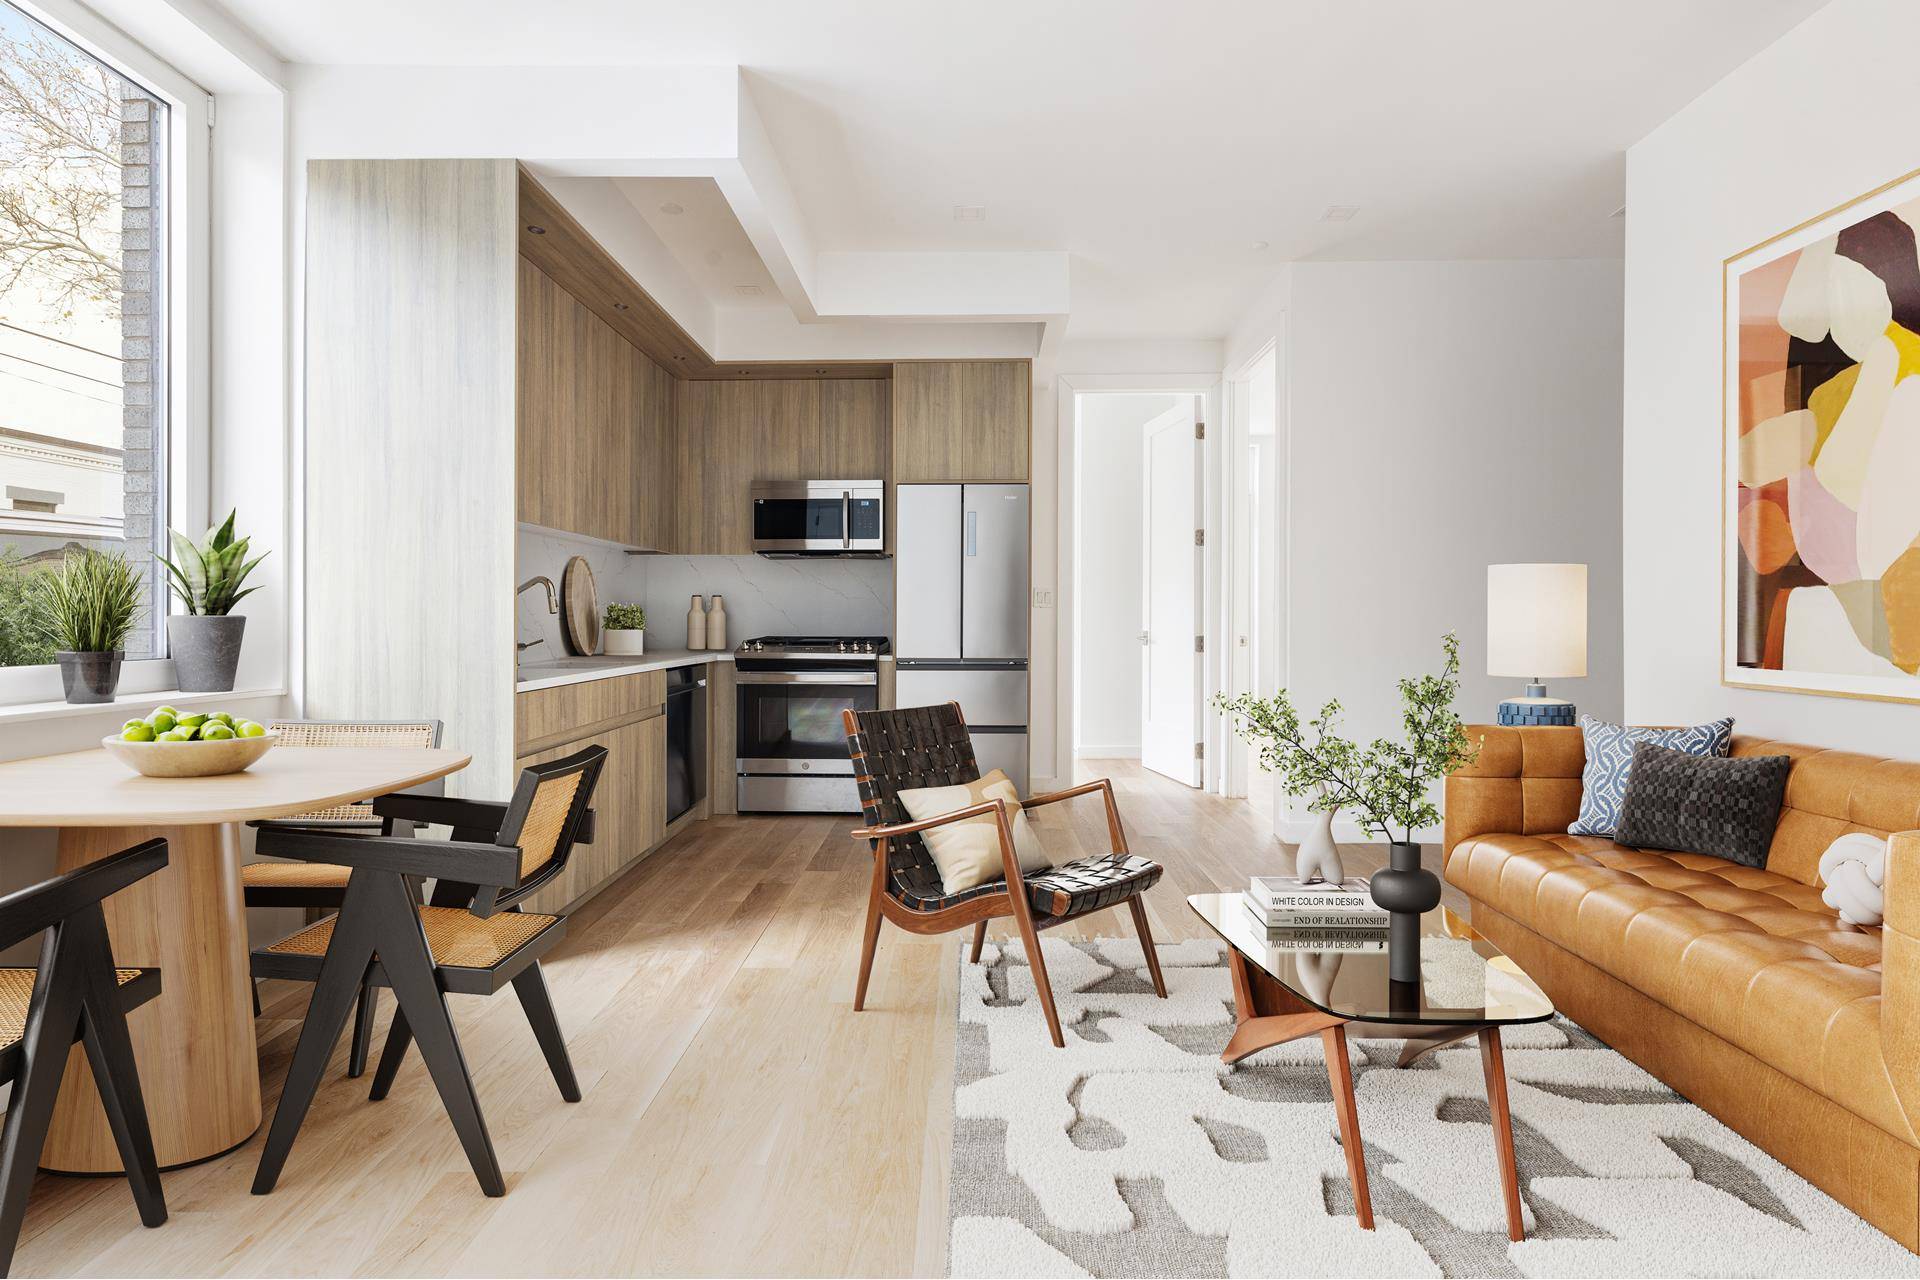 IMMEDIATE CLOSINGS ! Located in the heart of Ridgewood, the 1904 Harman Street Condominium introduces 7 highly crafted, brand new, sunny one and two bedroom homes with thoughtful layouts and ...